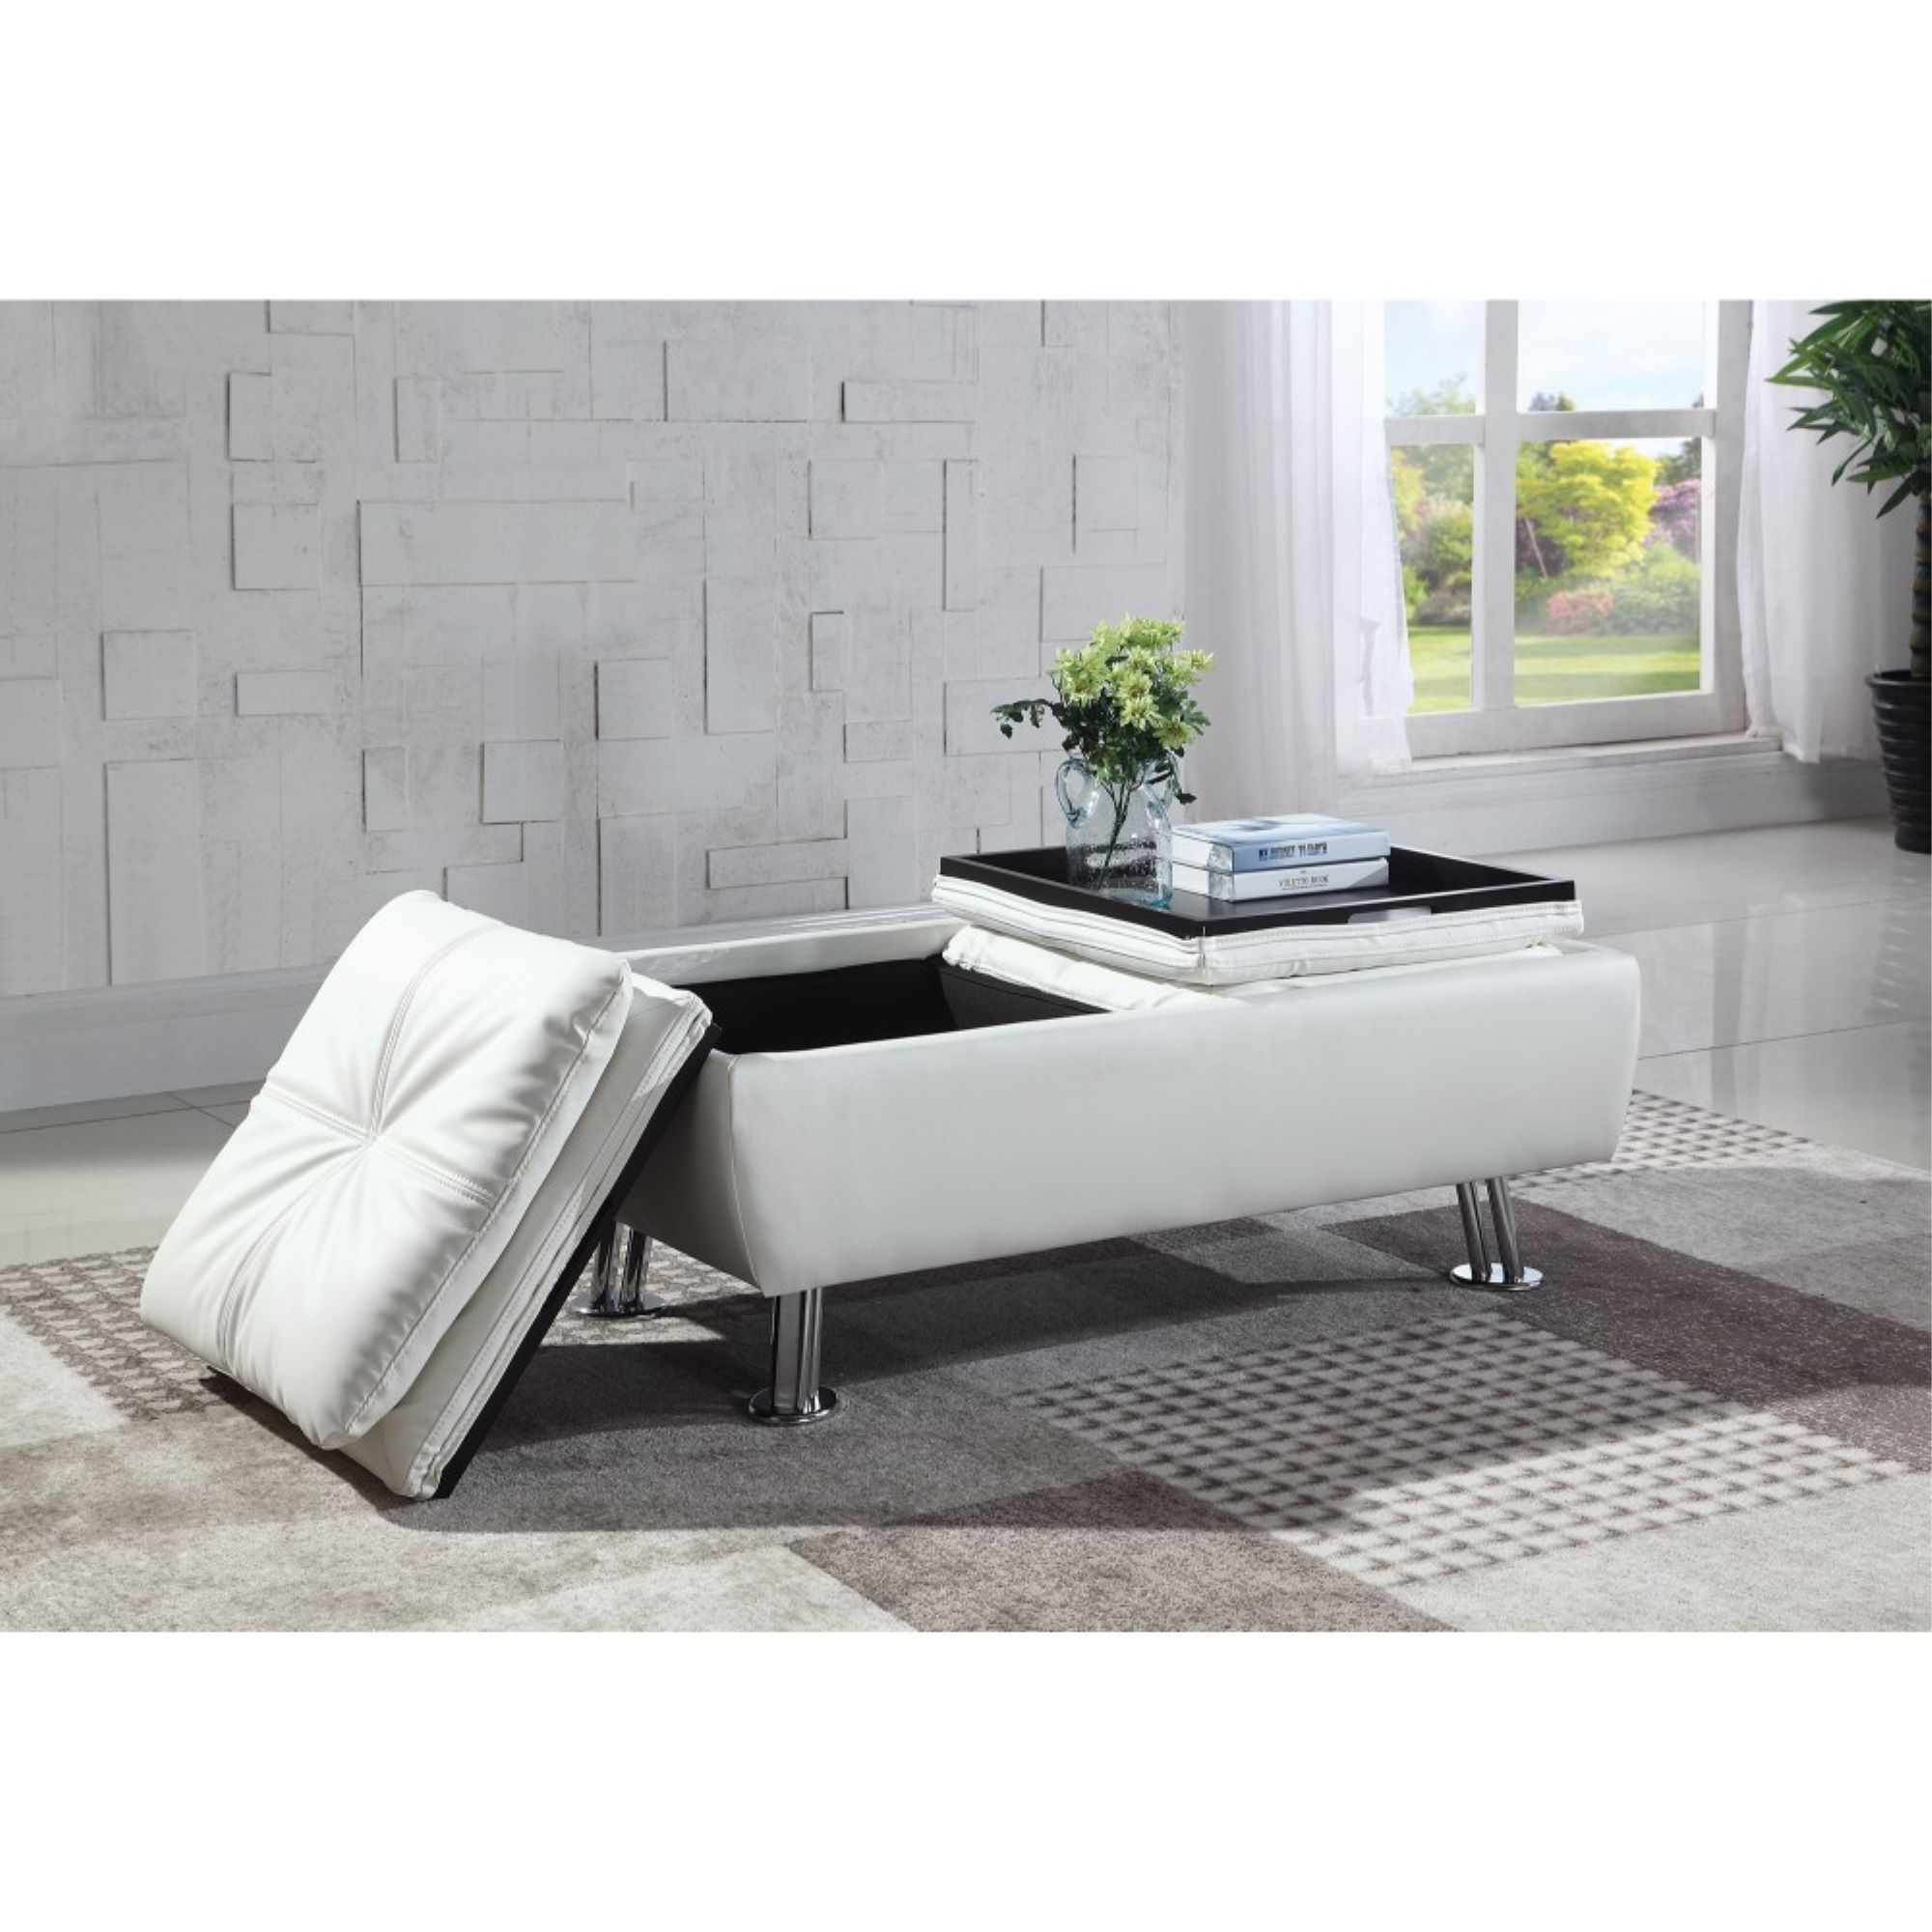 Faux Leather Ottoman With Reversible Tray Tops, White – Walmart Intended For Ottomans With Reversible Tray (View 6 of 15)